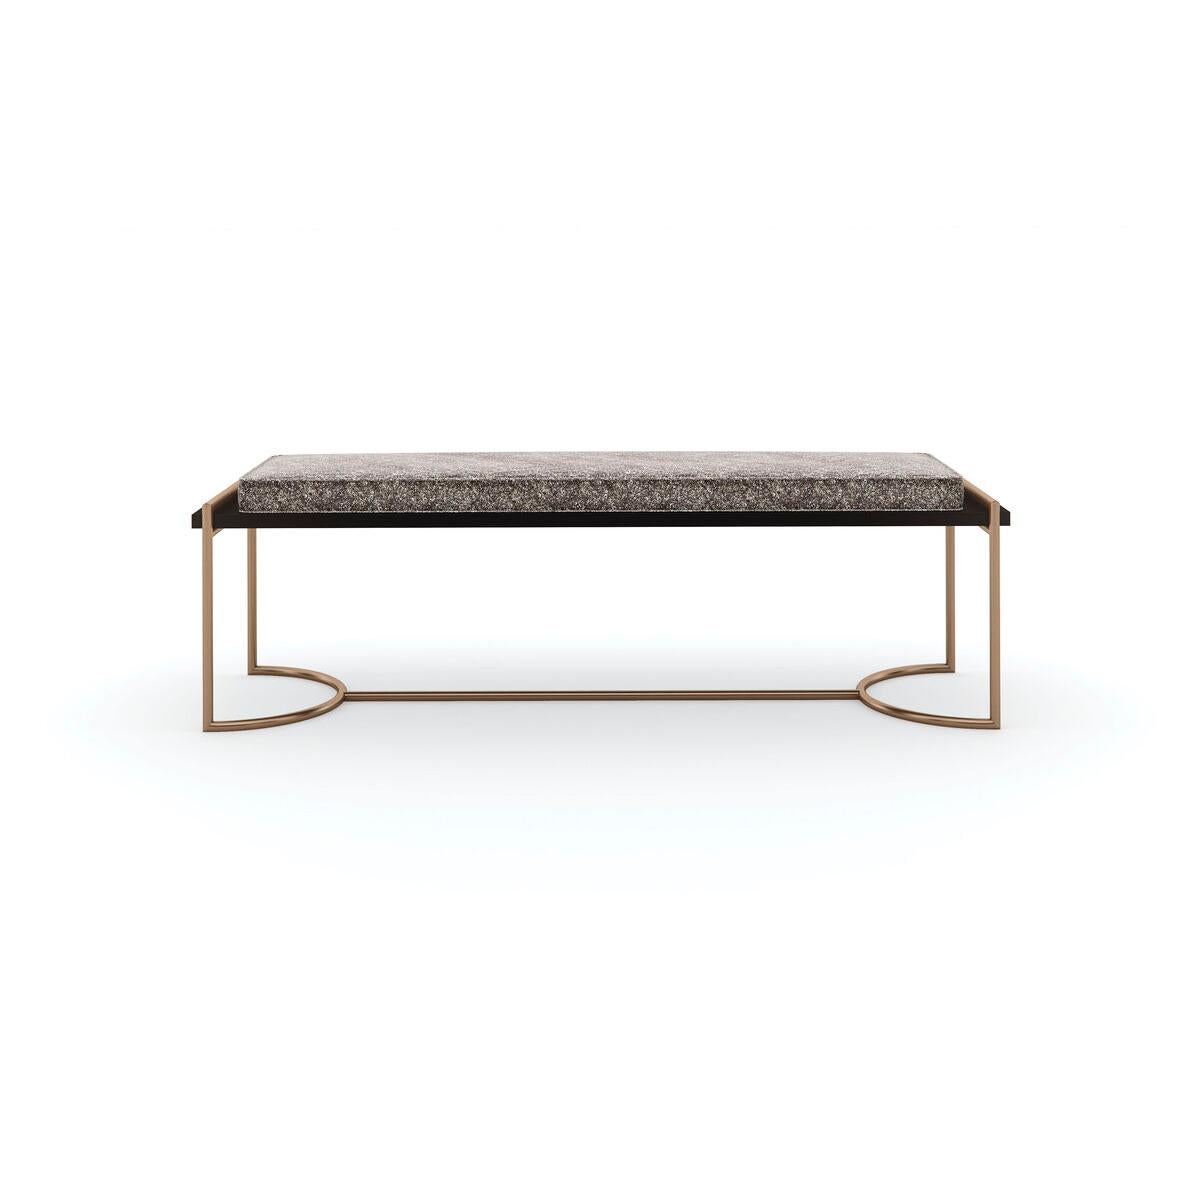 Simply sophisticated, this contemporary take on the end-of-bed bench introduces a European-inspired design to bedroom suites and dressing areas.

Minimal embellishment and clean lines emphasize its refined use of materials: a textural velvet-covered